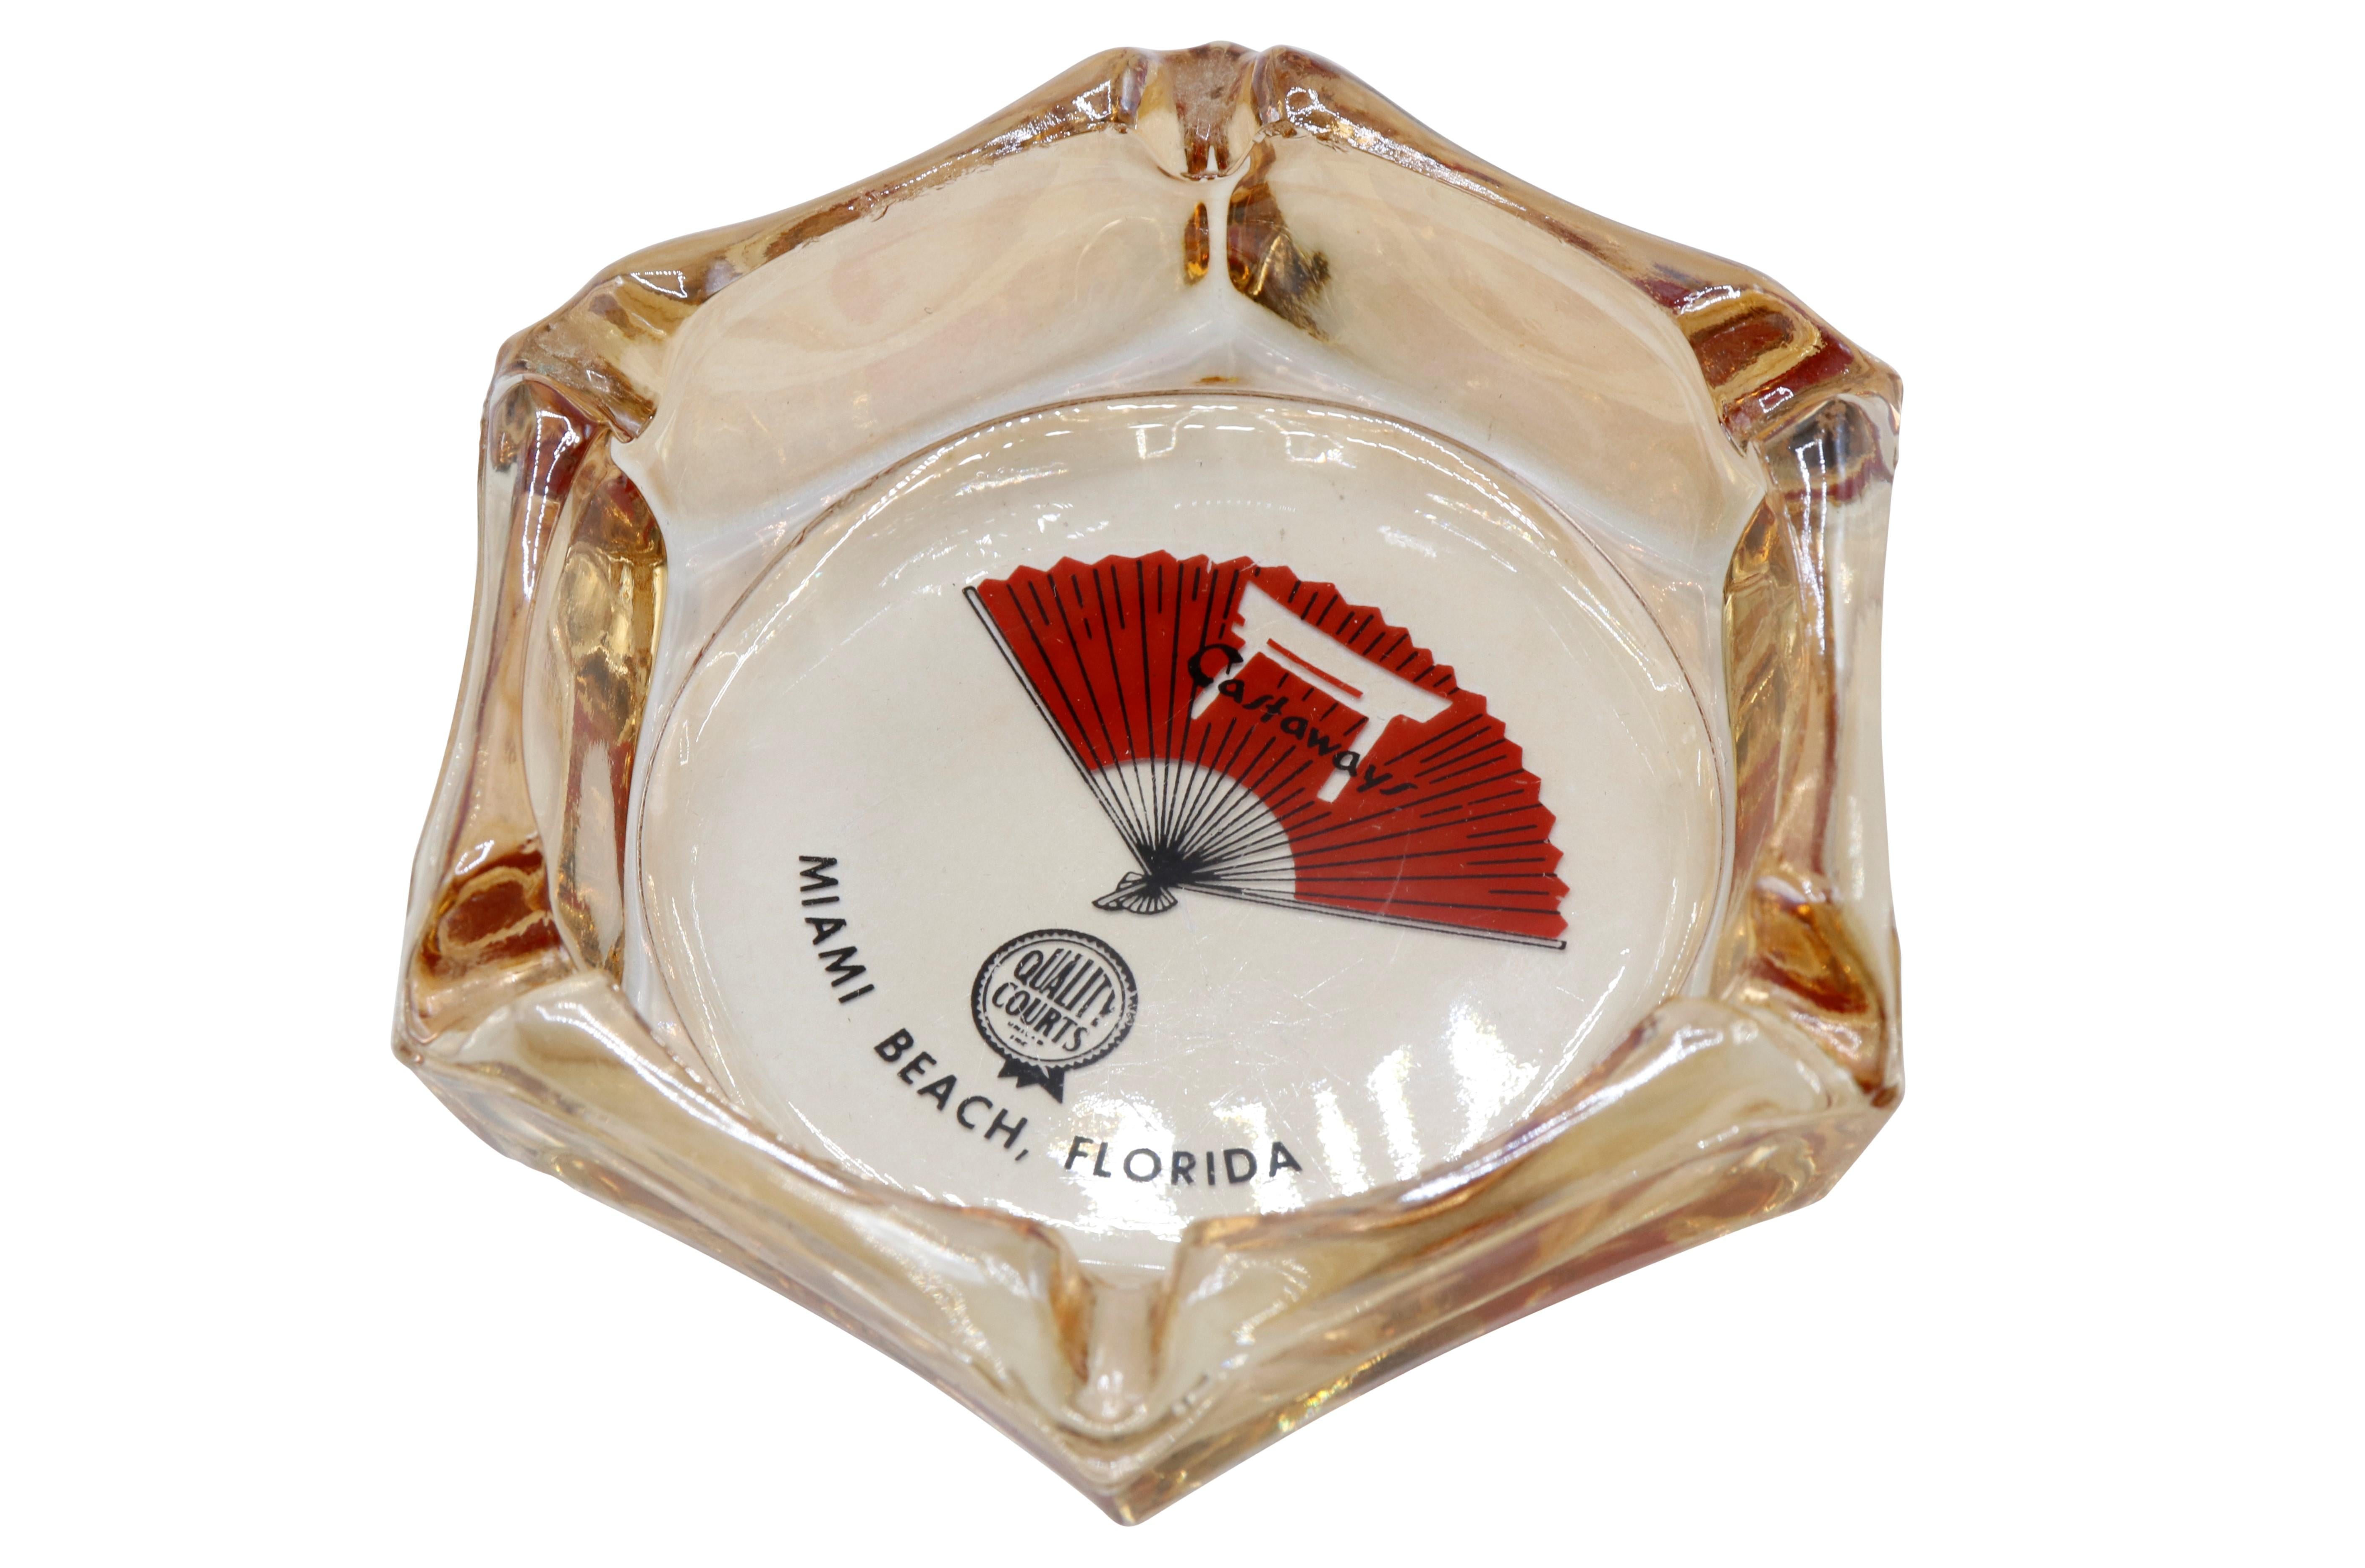 A pair of hexagonal glass ashtray from The Castaways Hotel of Miami Beach, Florida. The center is printed with their logo and reads “Castaways, Quality Courts, Miami Beach Florida”. Dimensions per ashtray. 